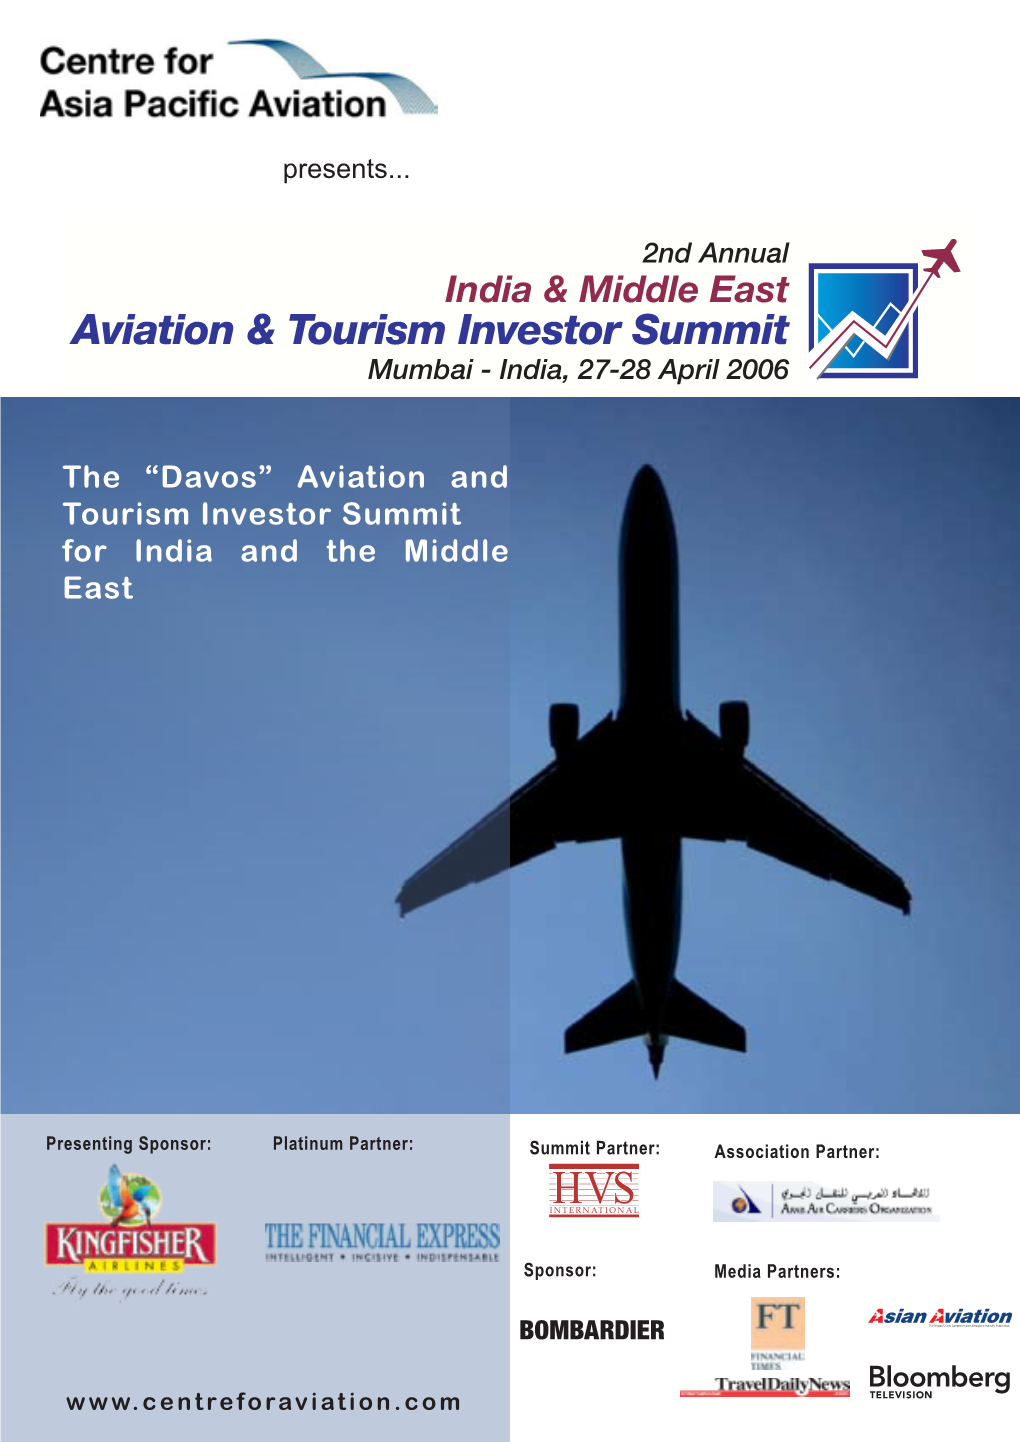 Aviation and Tourism Investor Summit for India and the Middle East